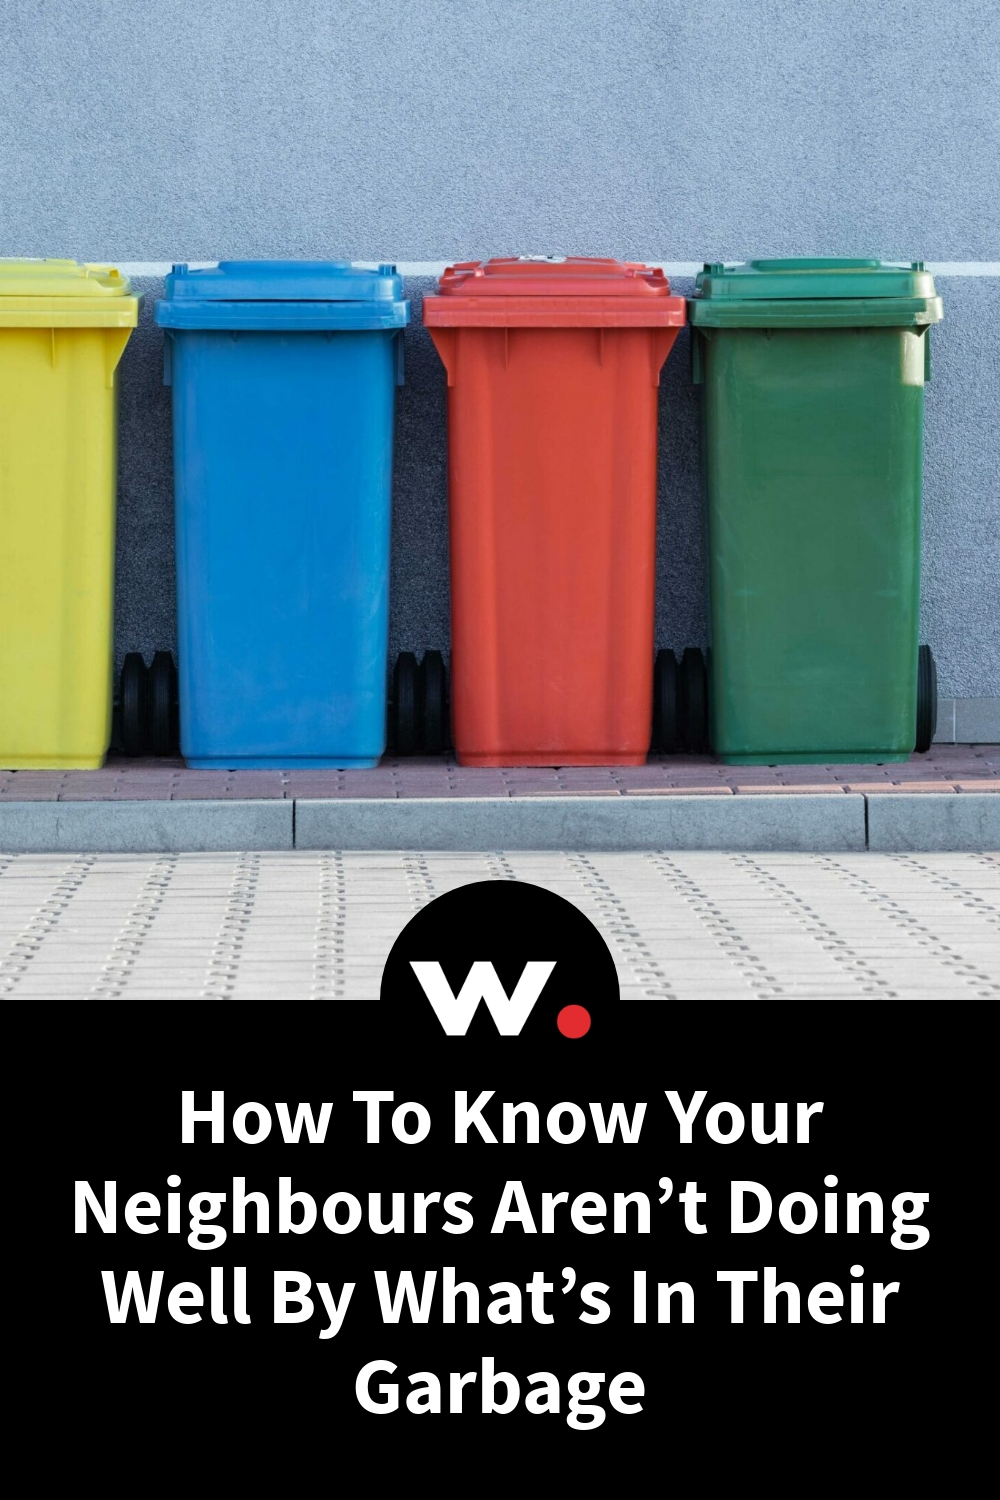 How To Know Your Neighbours Aren’t Doing Well By What’s In Their Garbage